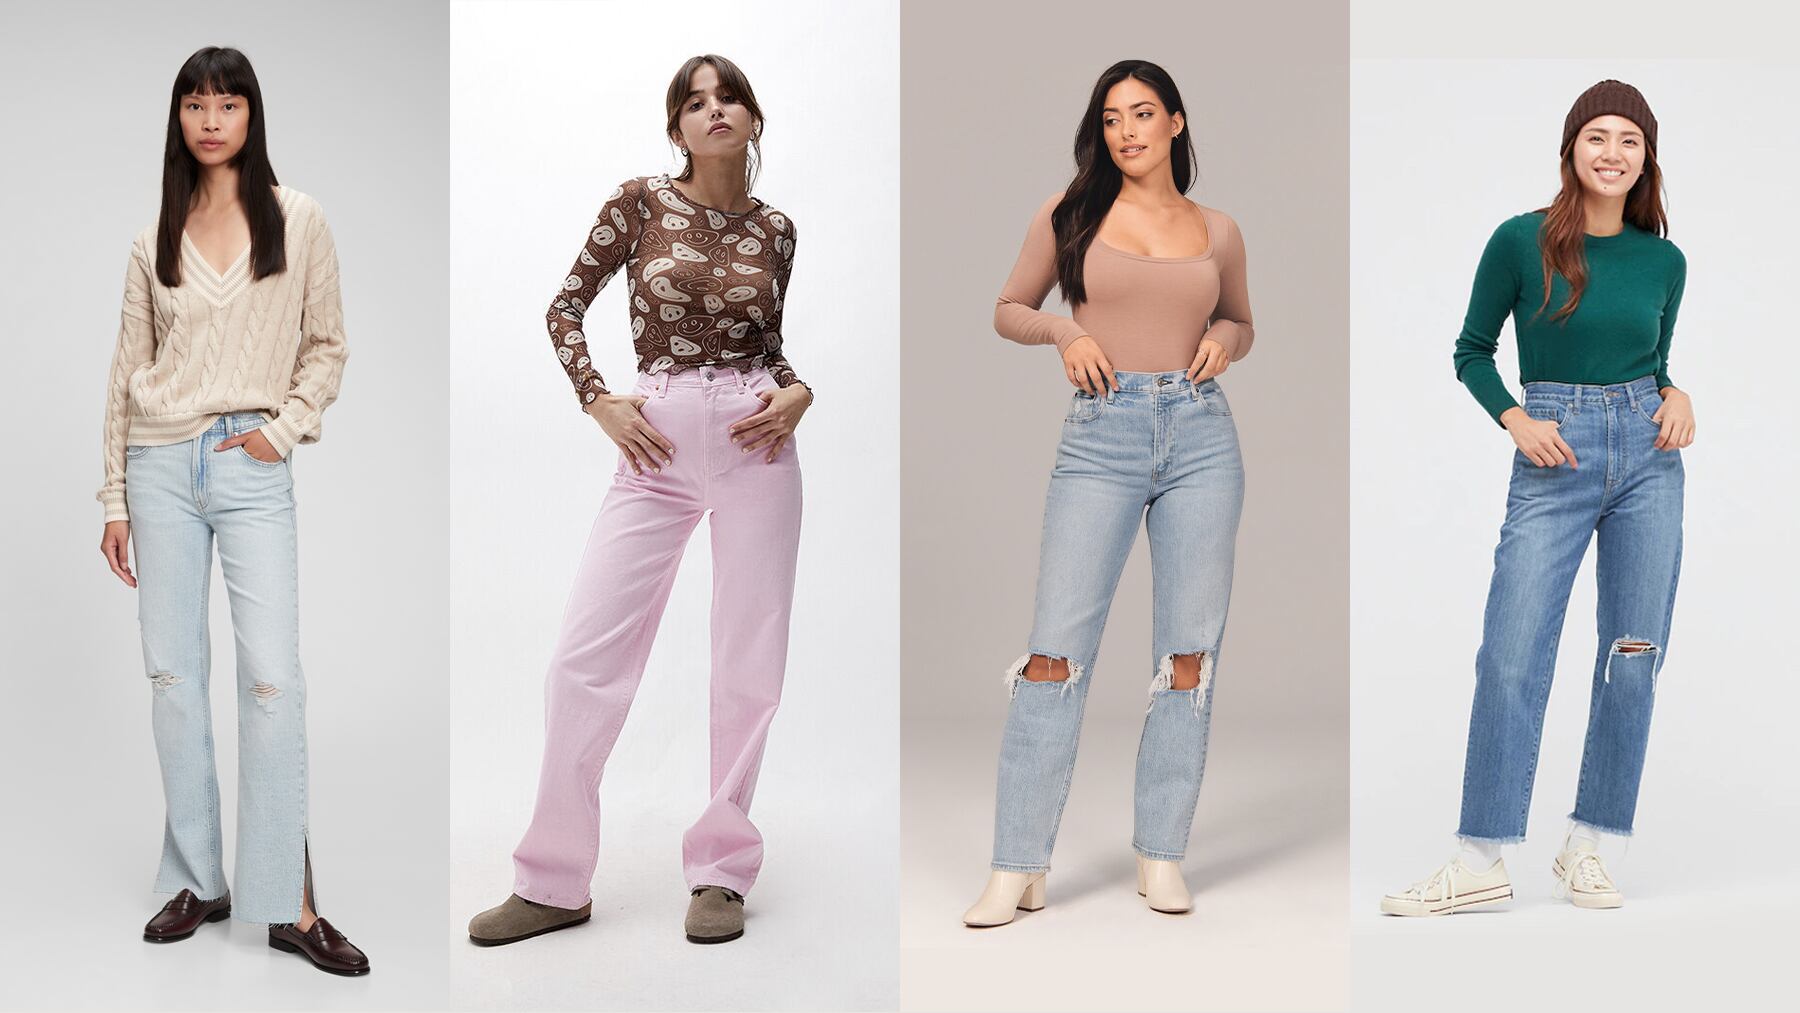 Wider-leg styles, driven by TikTok trends and the consumer preference for comfort, have unseated skinny jeans as new best-sellers in denim. From left, styles by Gap, PacSun, Abercrombie & Fitch and Uniqlo.